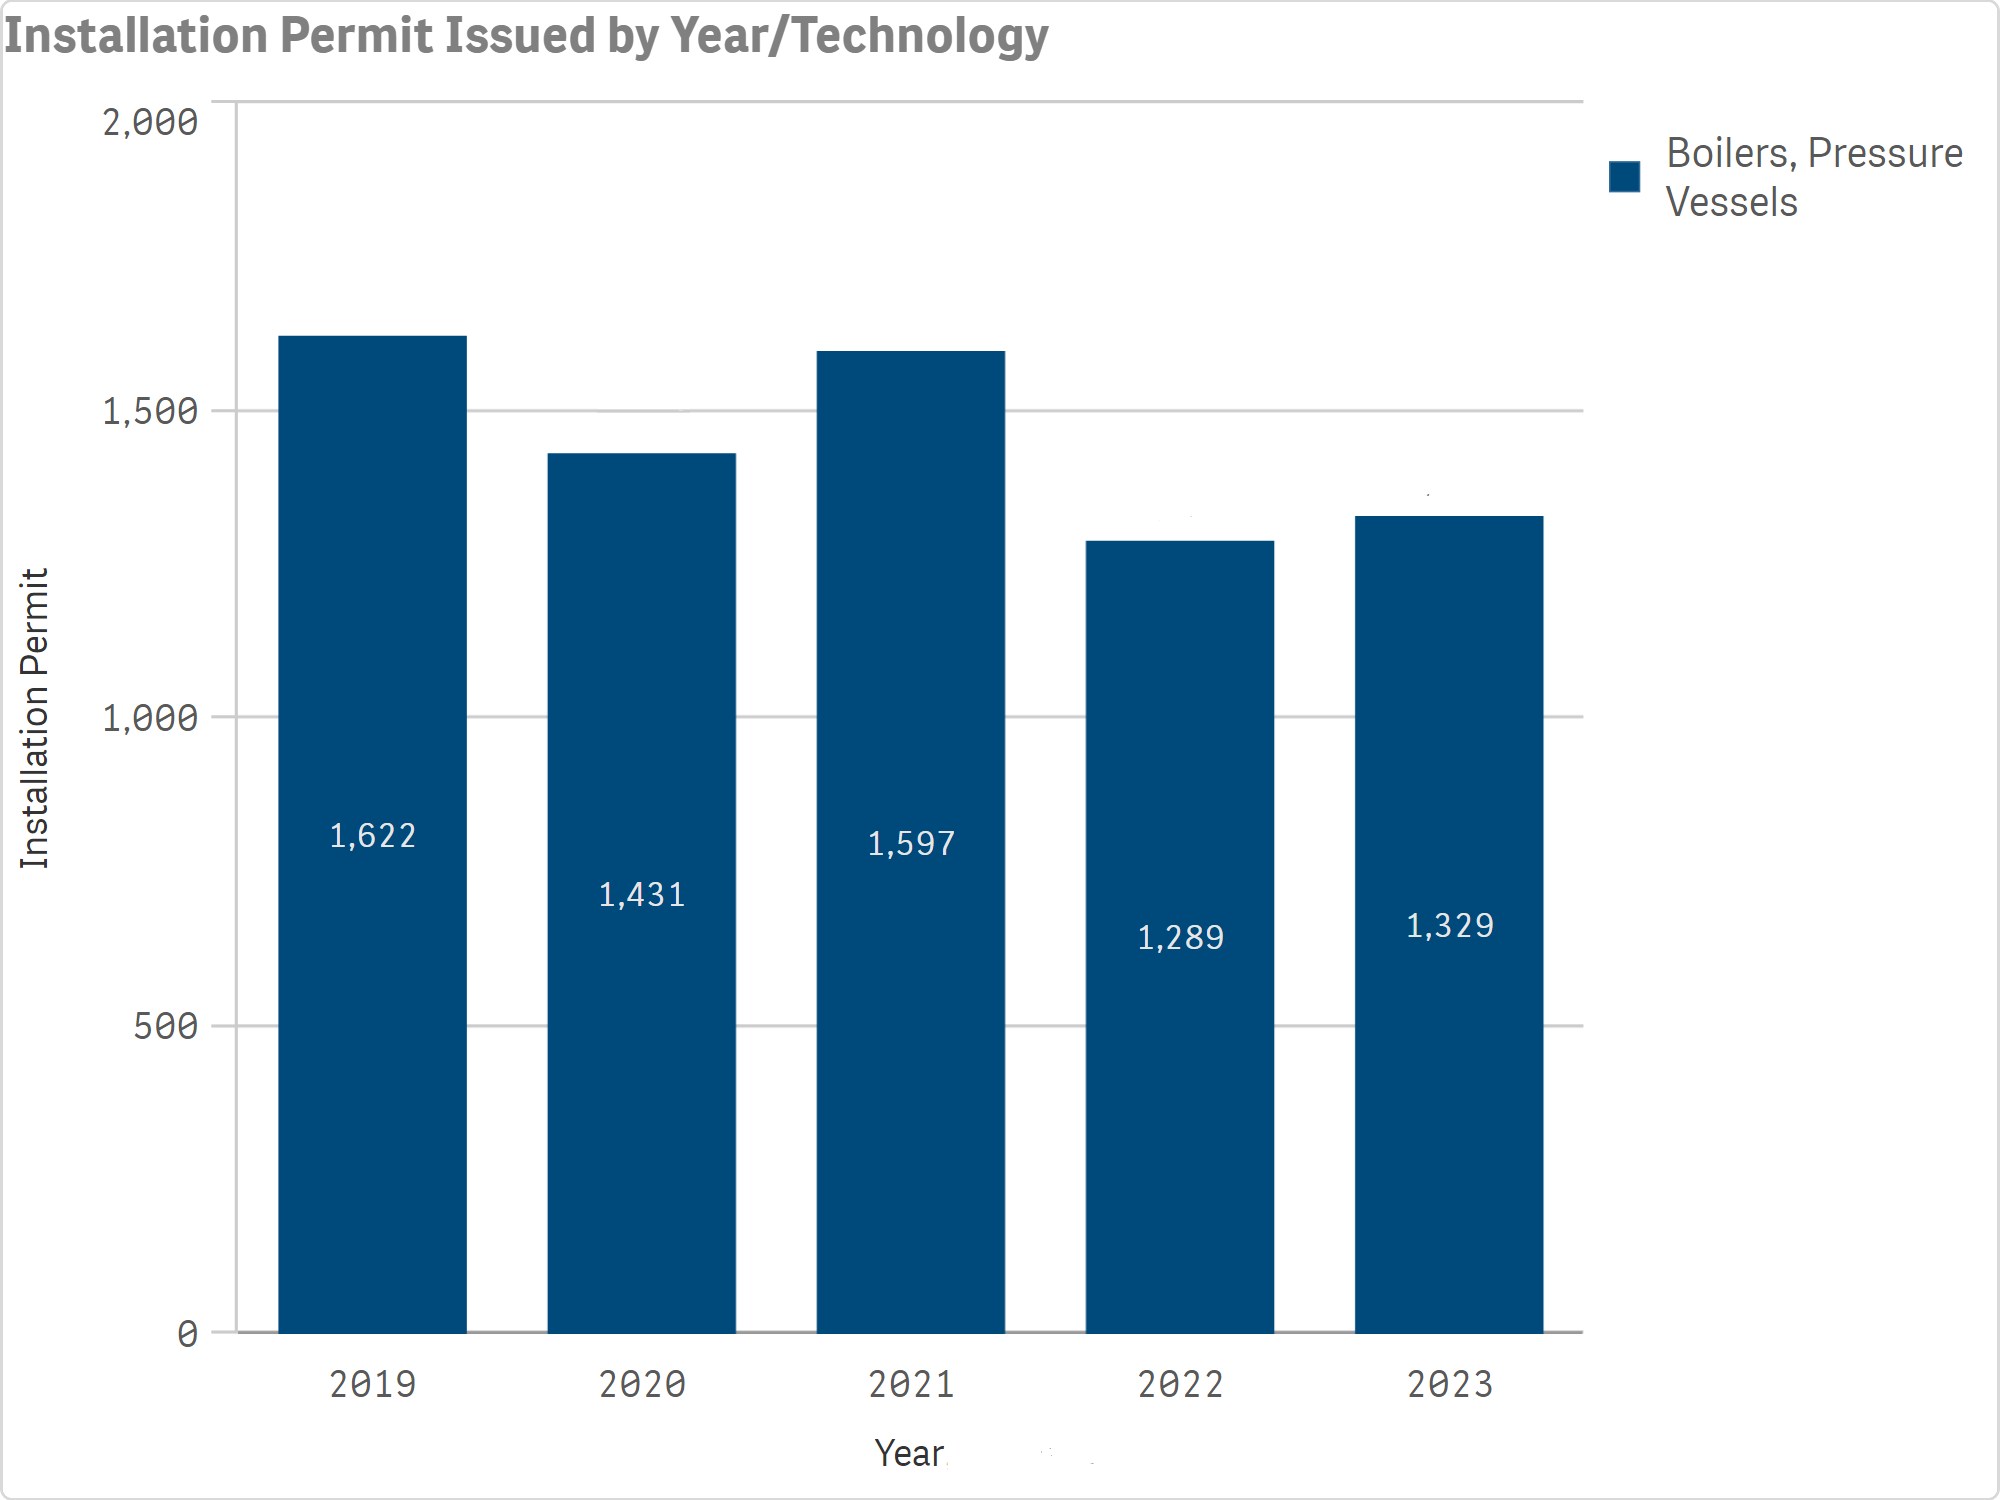 BPVR_Installation_Permits_by_Year.png